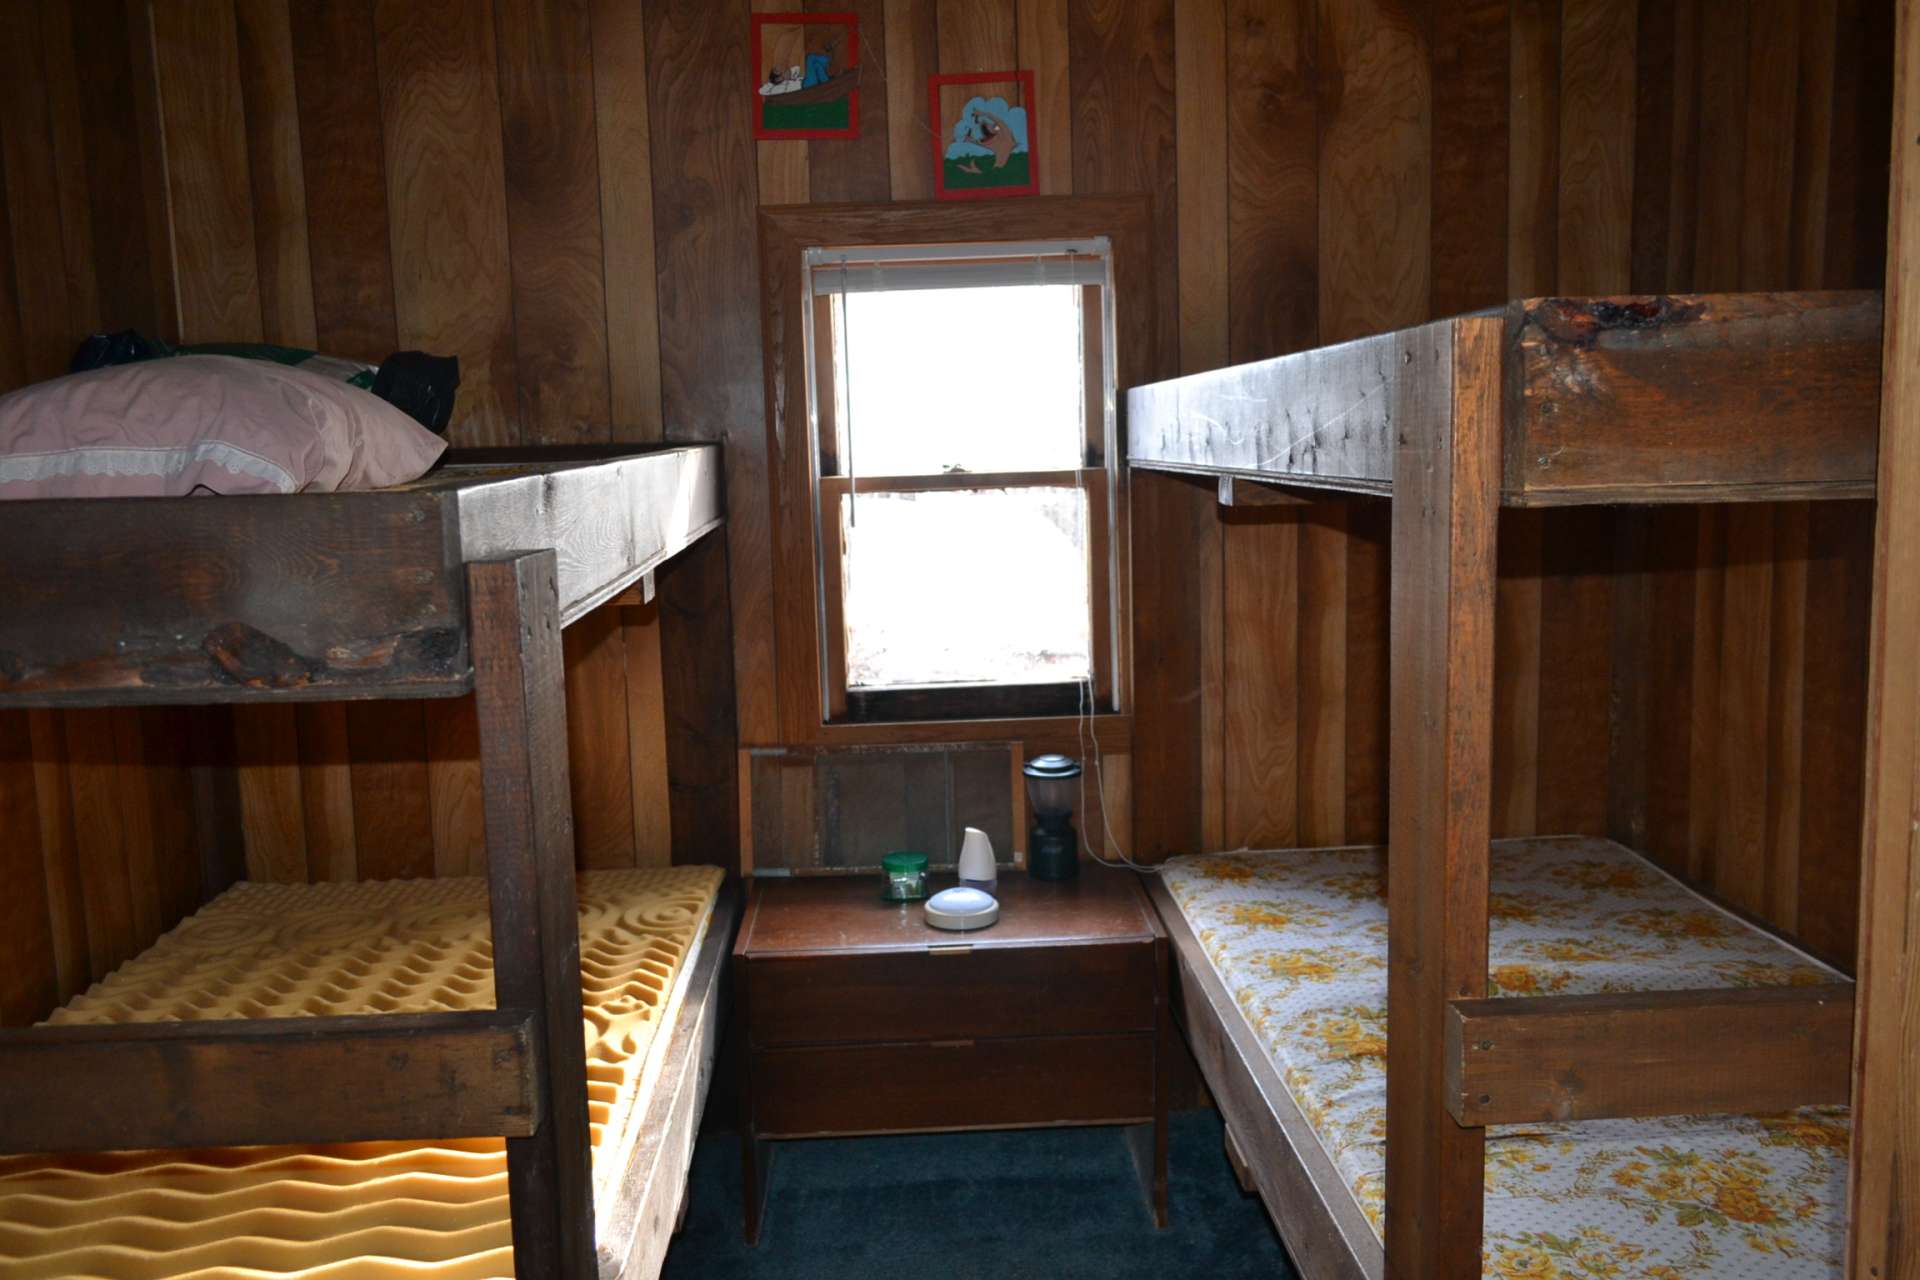 Two small bedrooms with handmade bunk beds, 1 full bath, cistern water system, septic in place.